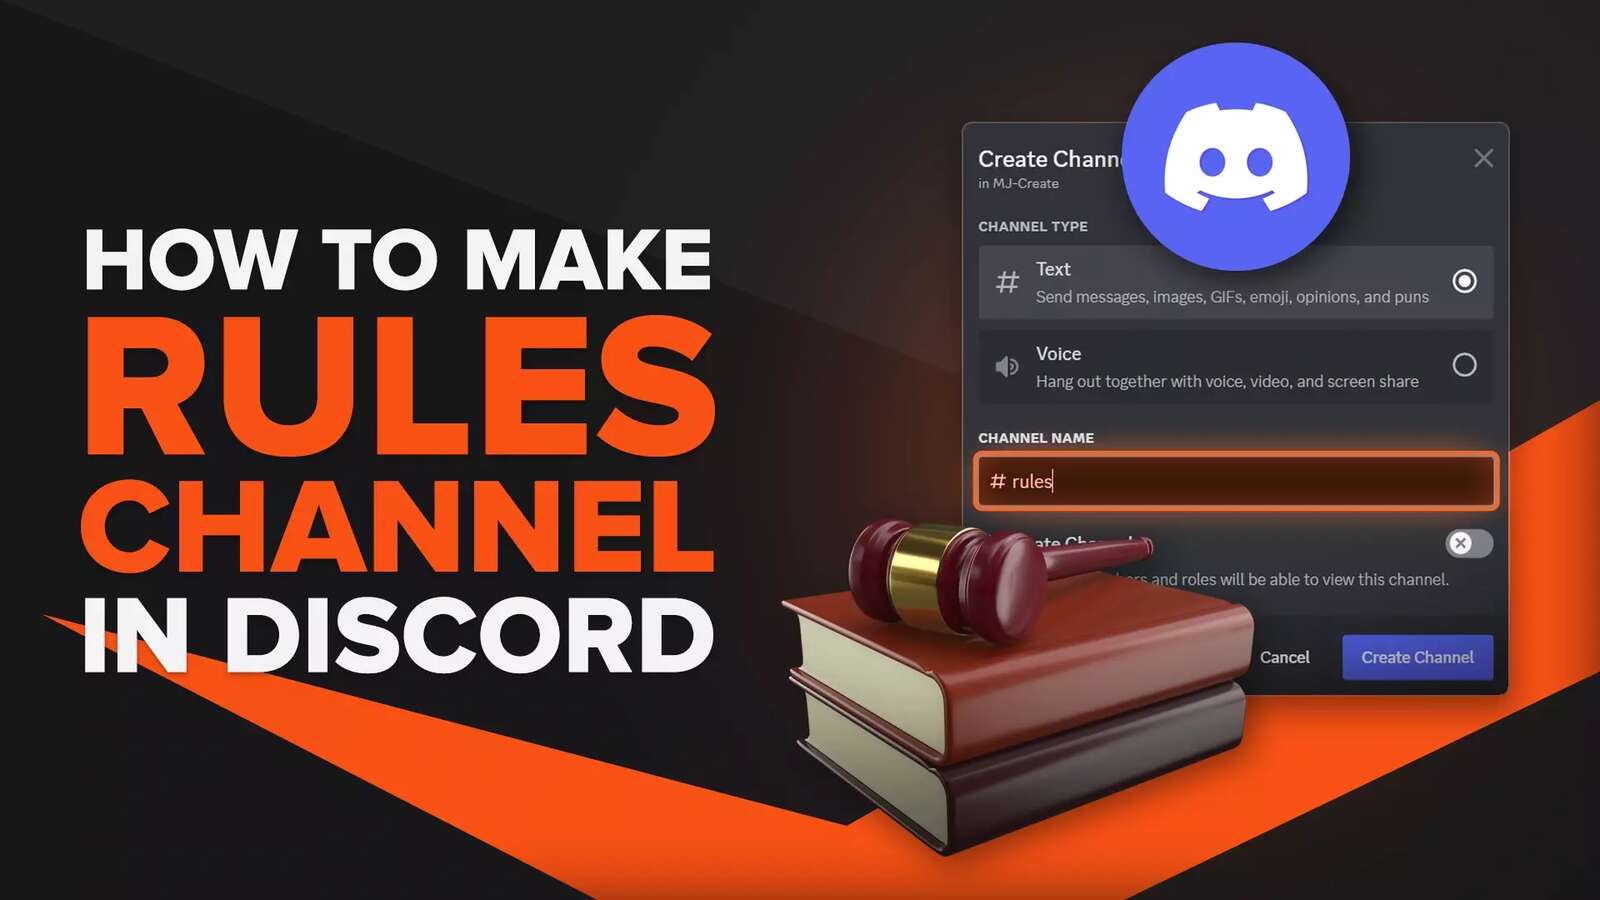 How To Make A Rules Channel In Discord? [Desktop And Mobile]